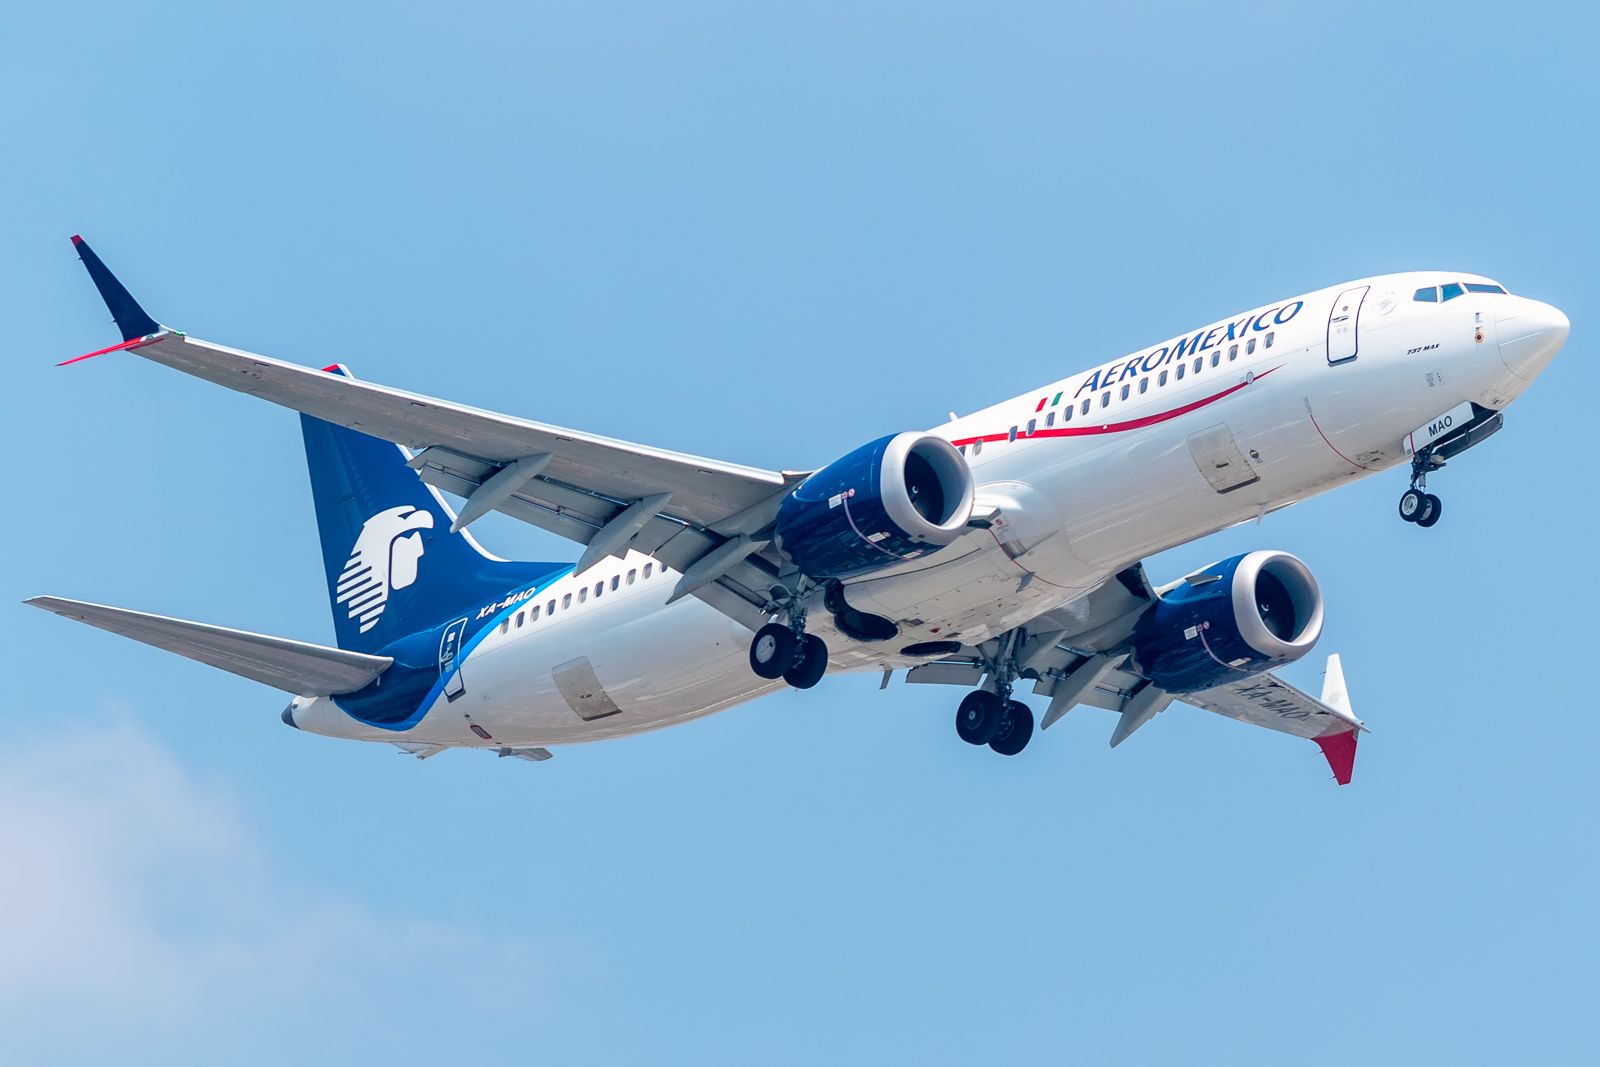 An Aeromexico Boeing 737 MAX 8 aircraft flying.